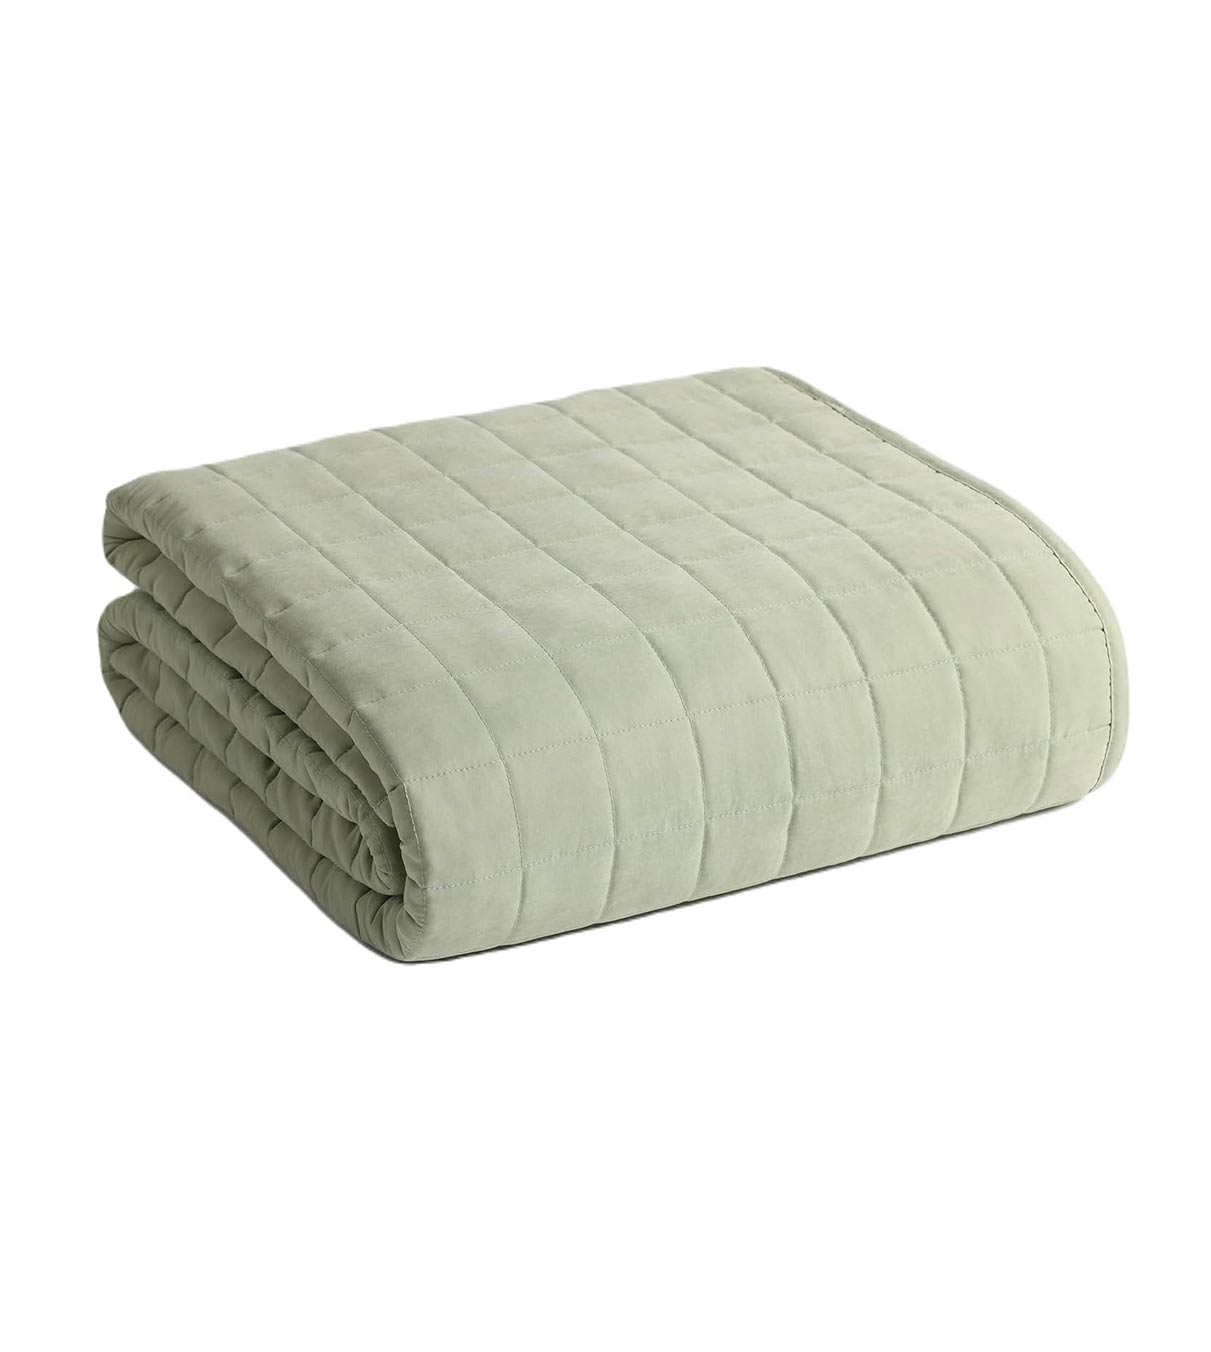 Product: 15lb Weighted Blanket | Color: Cotton-Polyester Avocado White 3.0